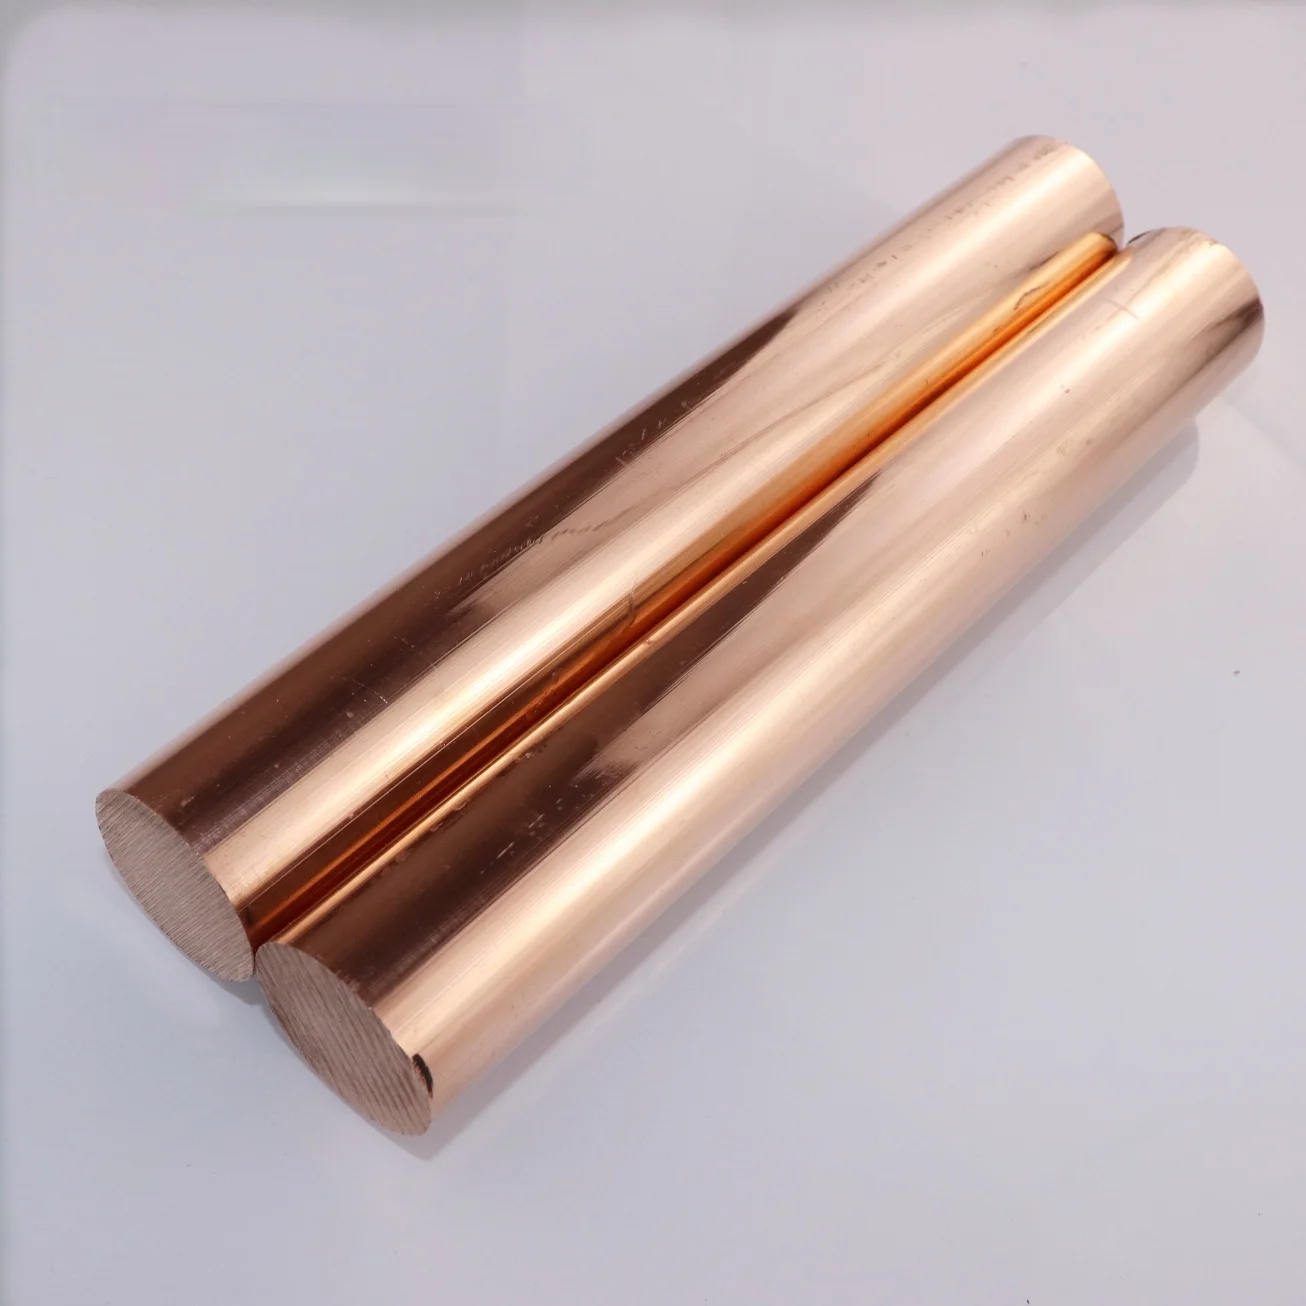 

Copper Bars Rods 14mm 20mm 10mm 12mm 20 Round Rods Blank Scales Blade Length 200mm T2 Copper Bar Stick DIY One Piece